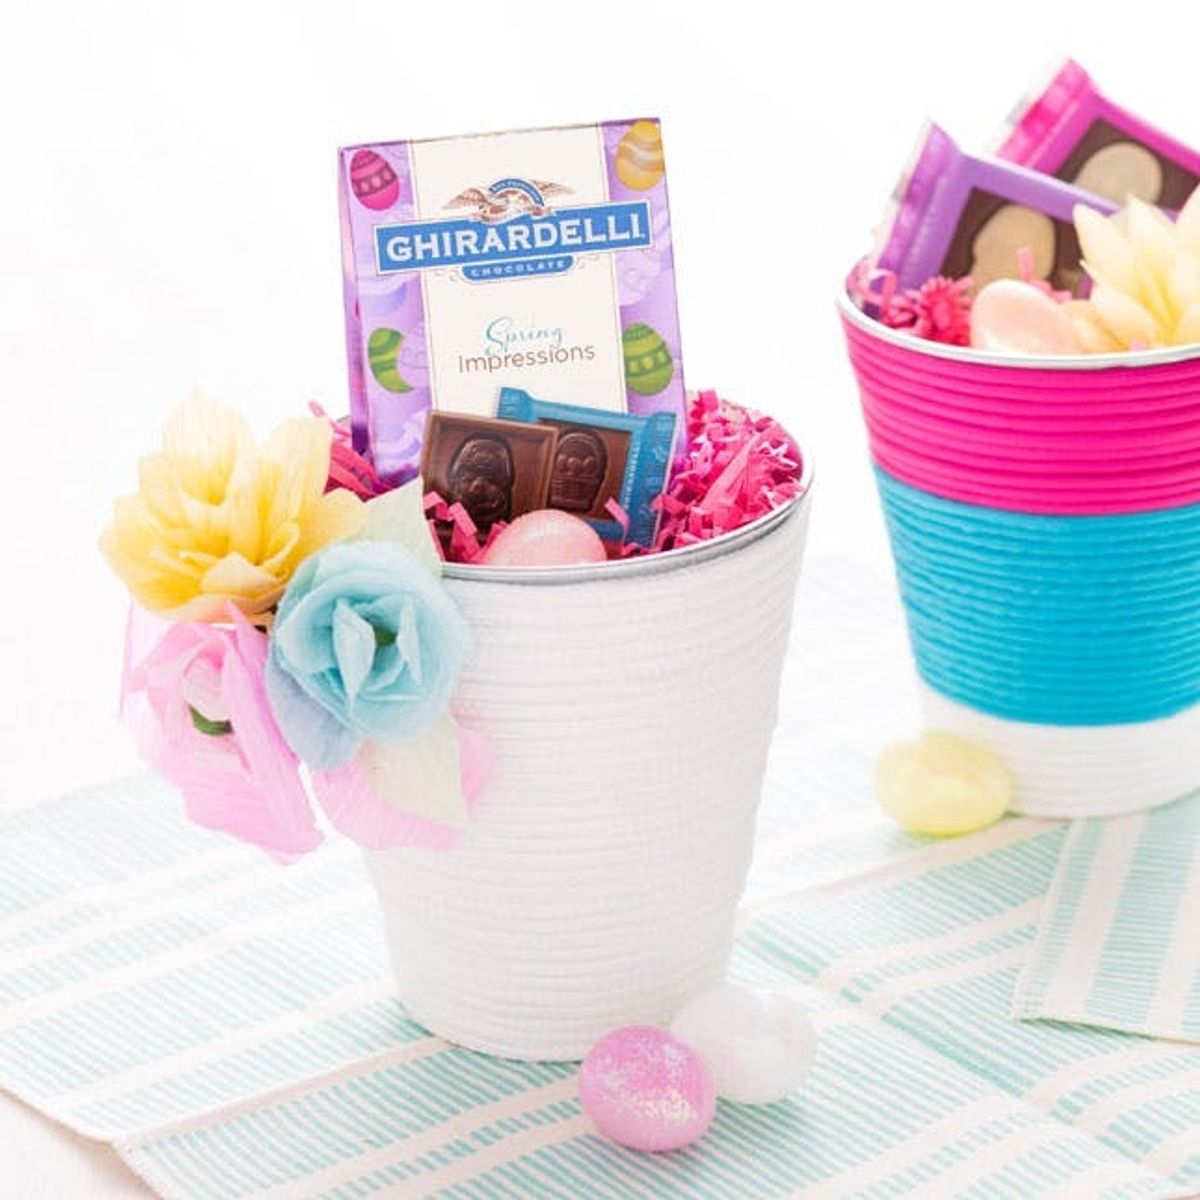 How to Turn a Bucket into a Colorful Easter Basket